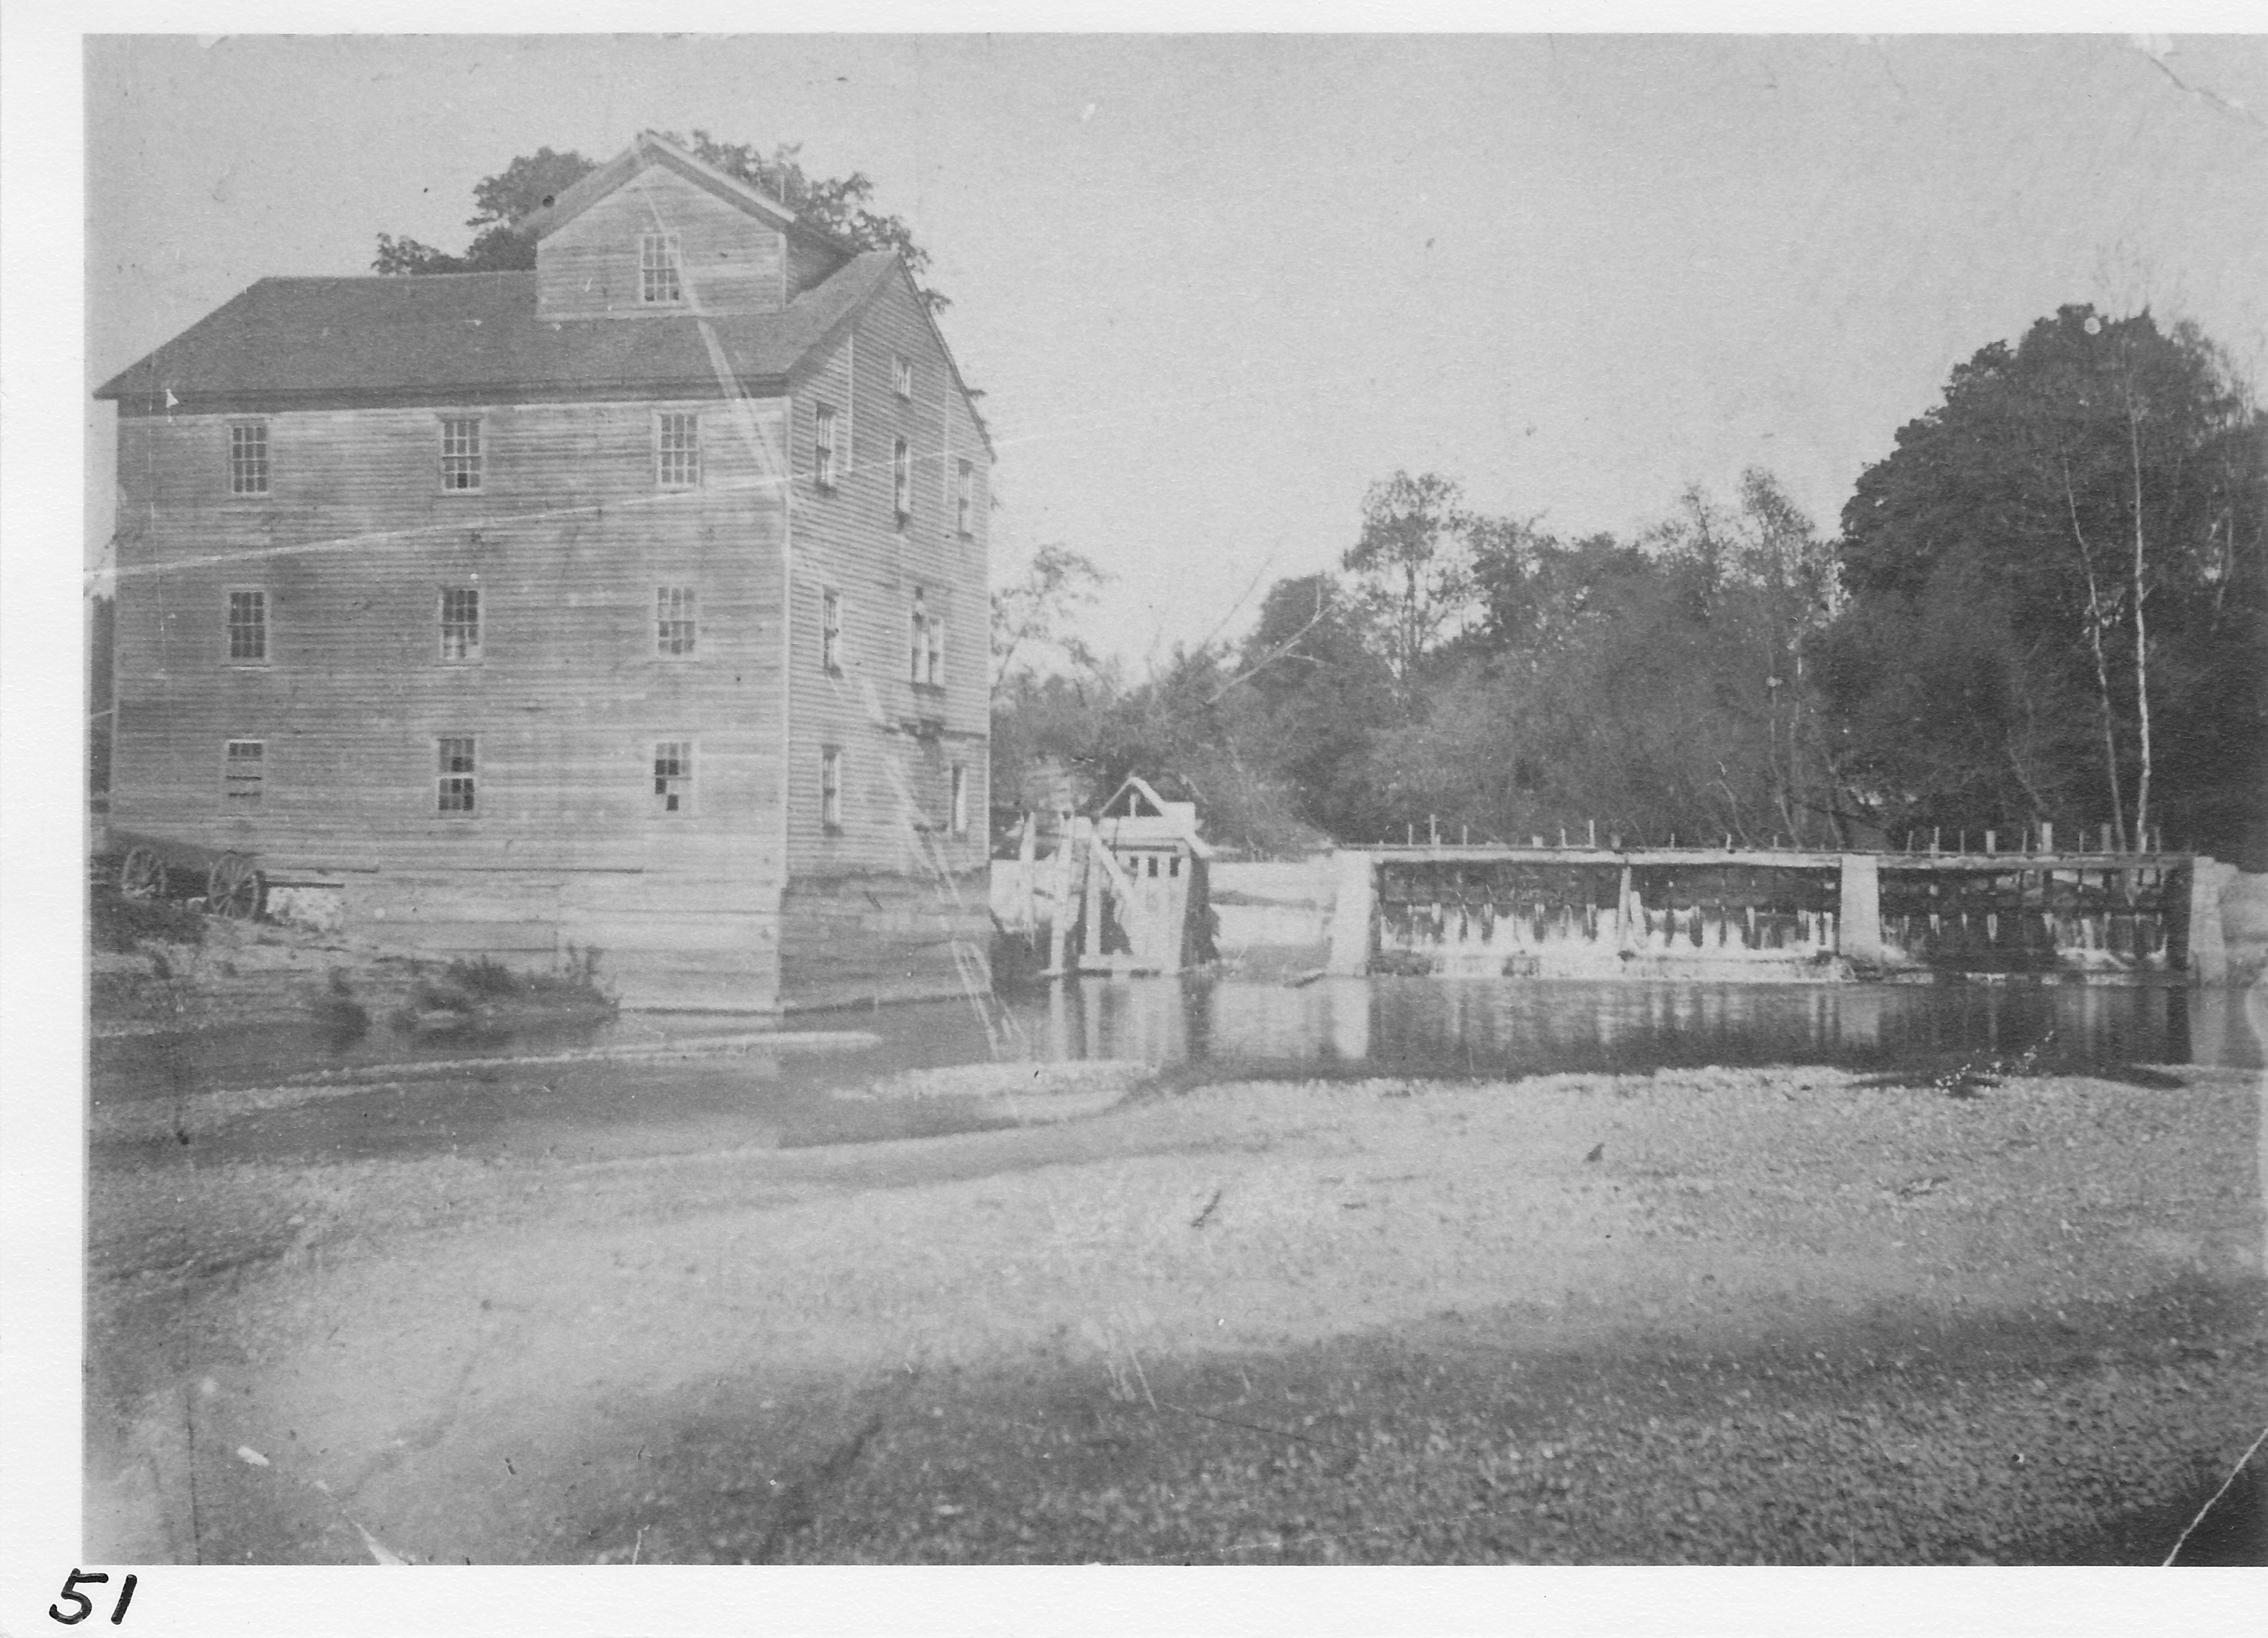 Pegtown Mill, Medina Township built in 1837. Concrete dam remnants still can be seen just north of bridge.